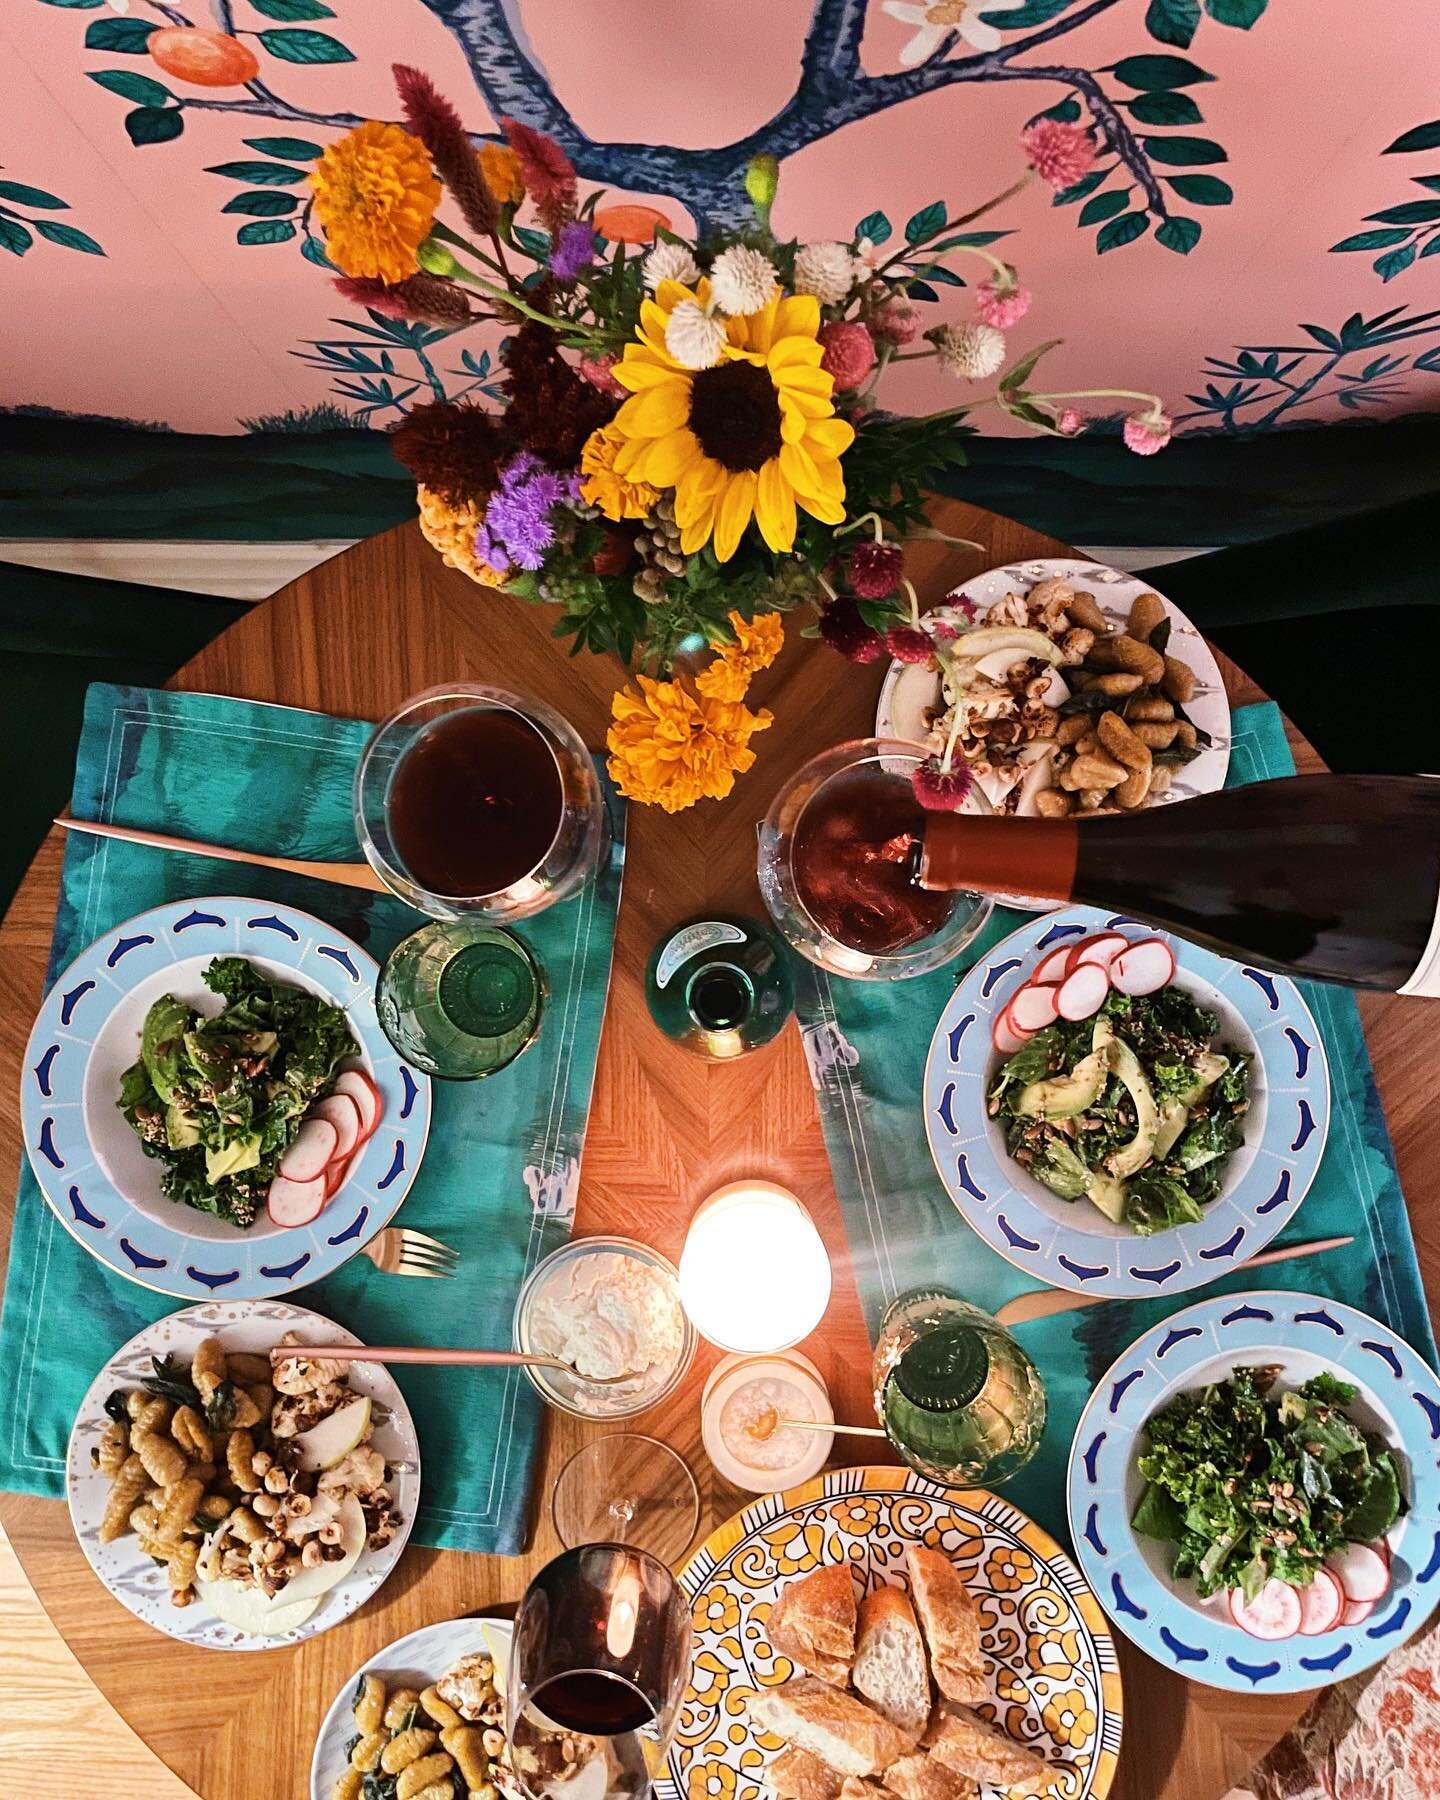 when i manifested this apartment (did i lose you already?), one of the things i valued most was a space where i could gather friends together around a table. suffice to say, moments like one &mdash; a late, cozy meal made on a casual monday &mdash; a